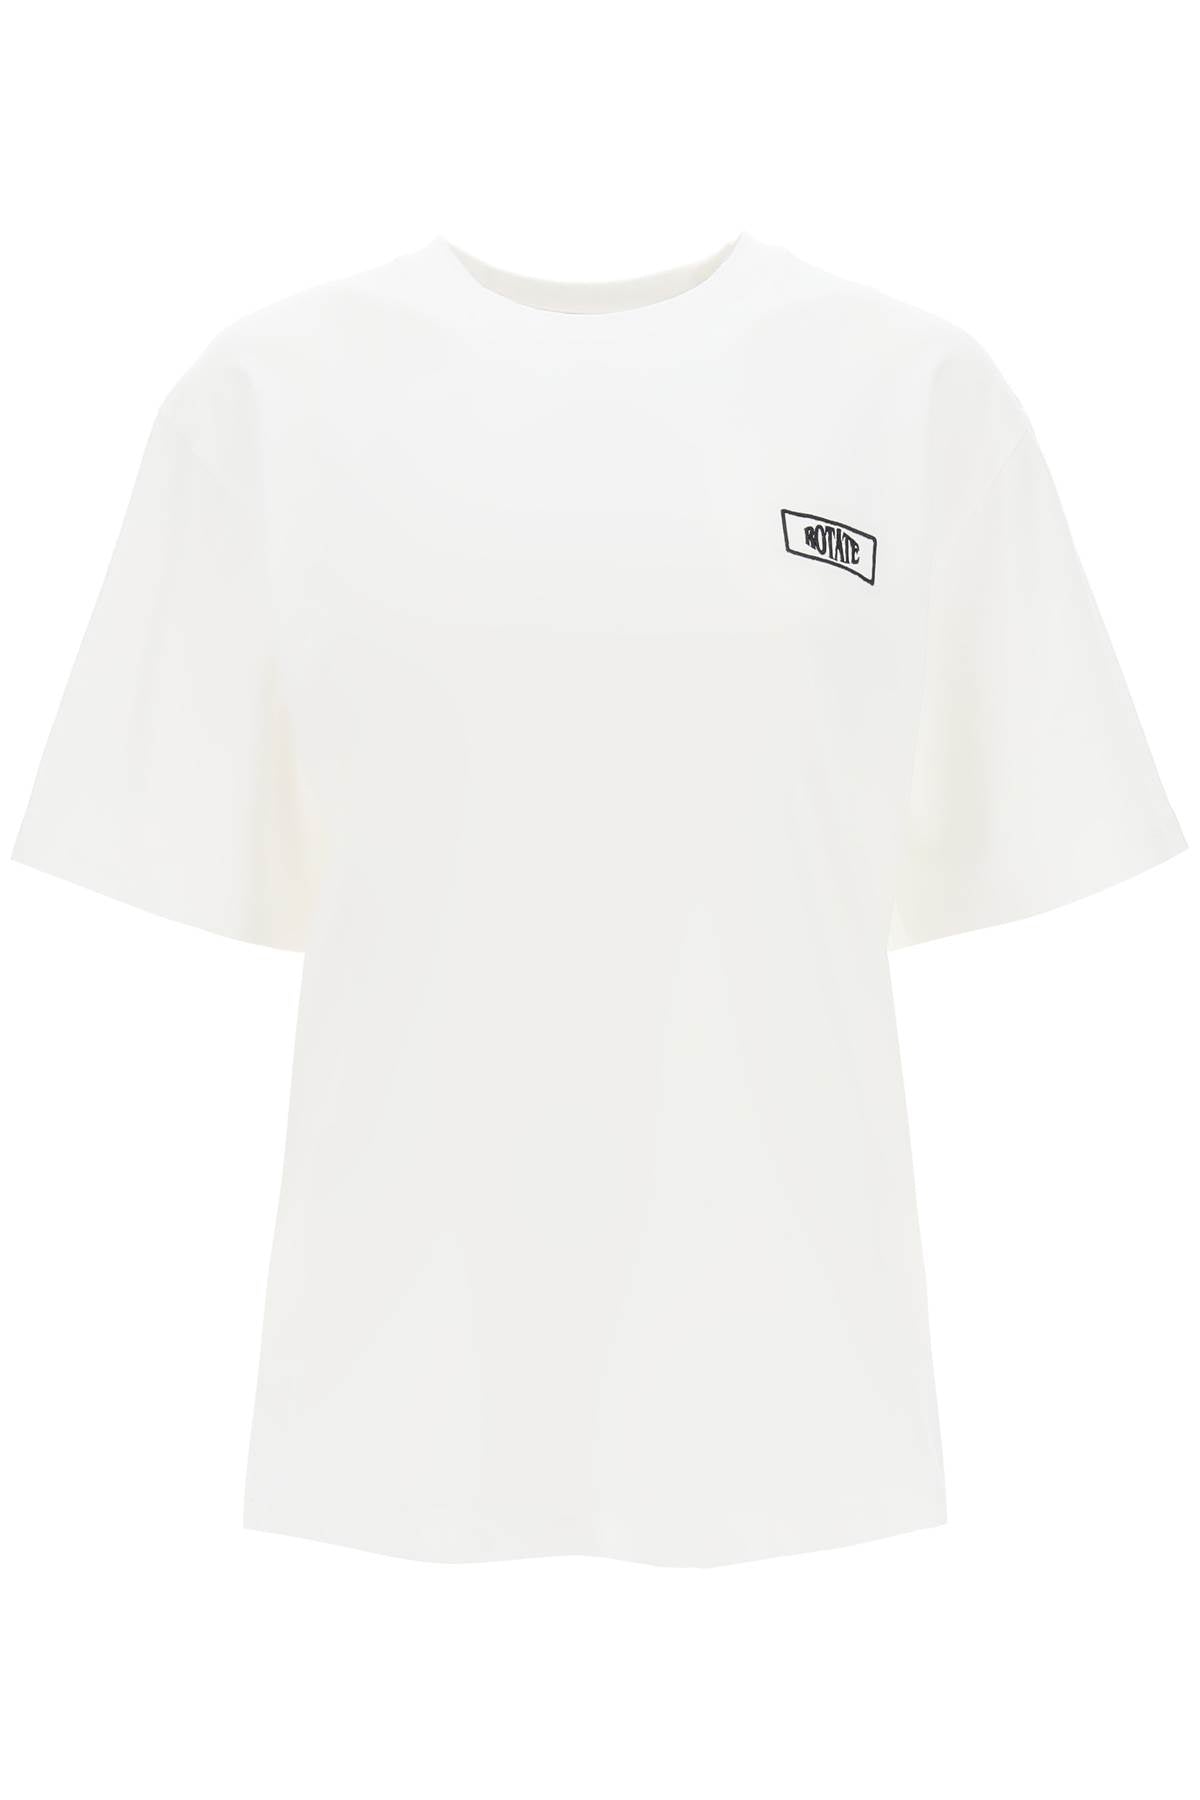 Rotate t-shirt with logo embroidery-0